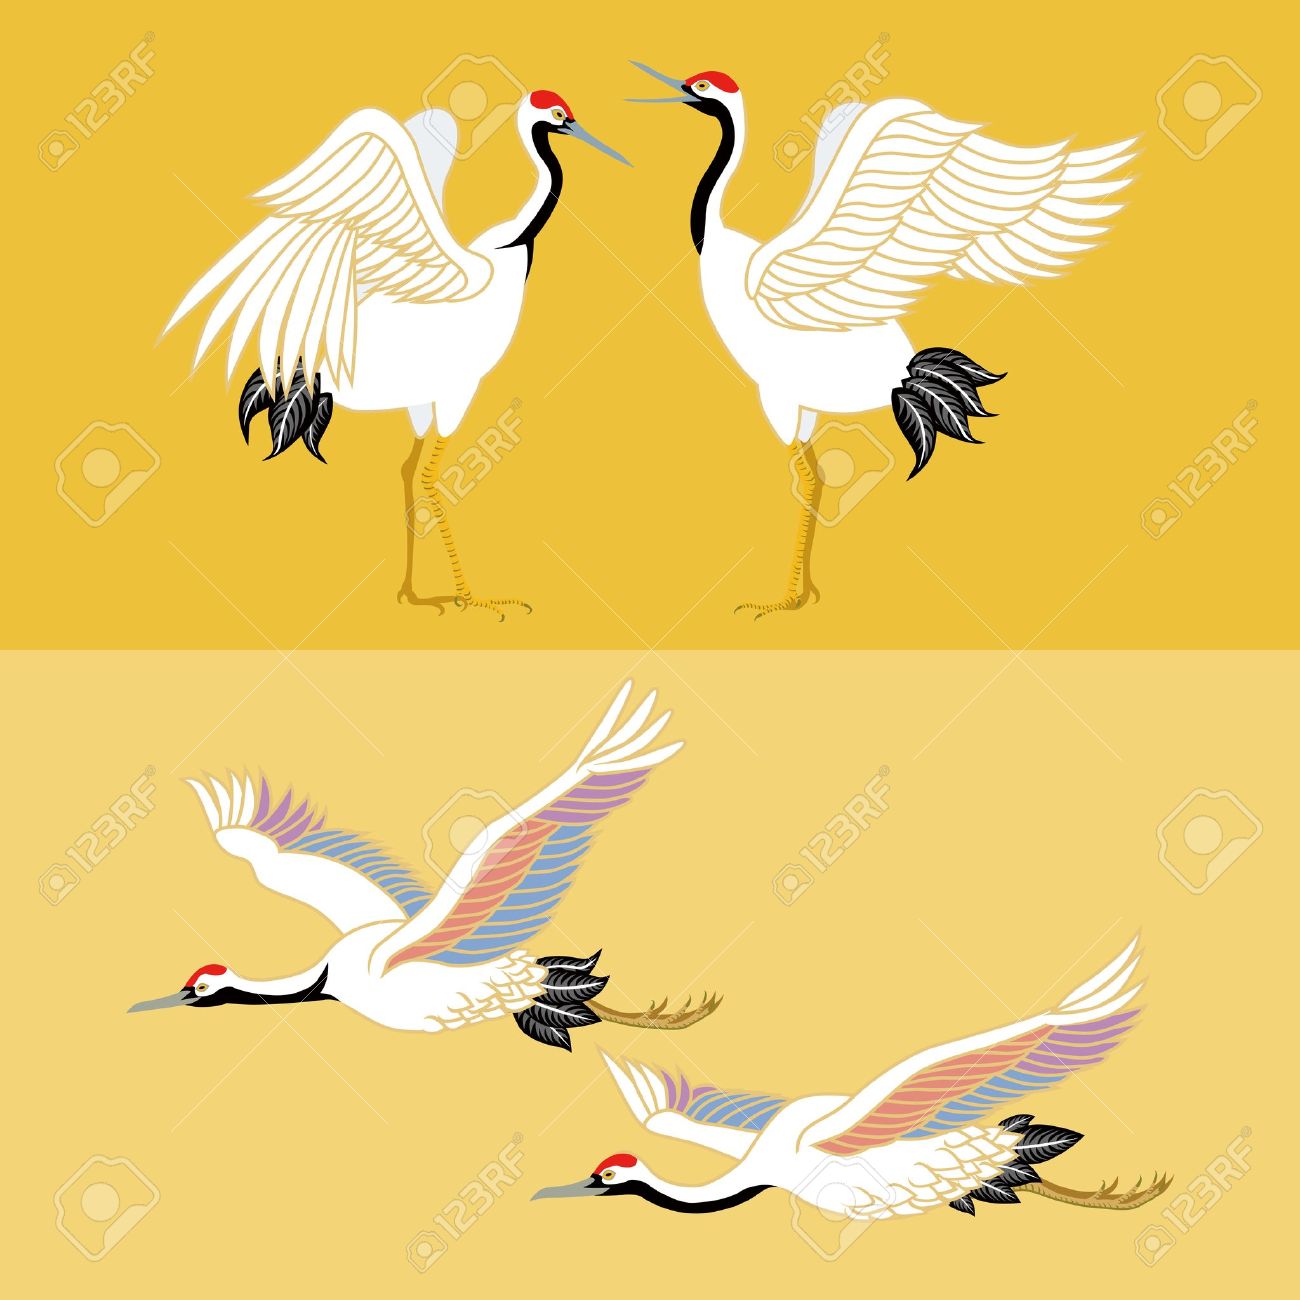 Japanese Crane clipart #3, Download drawings